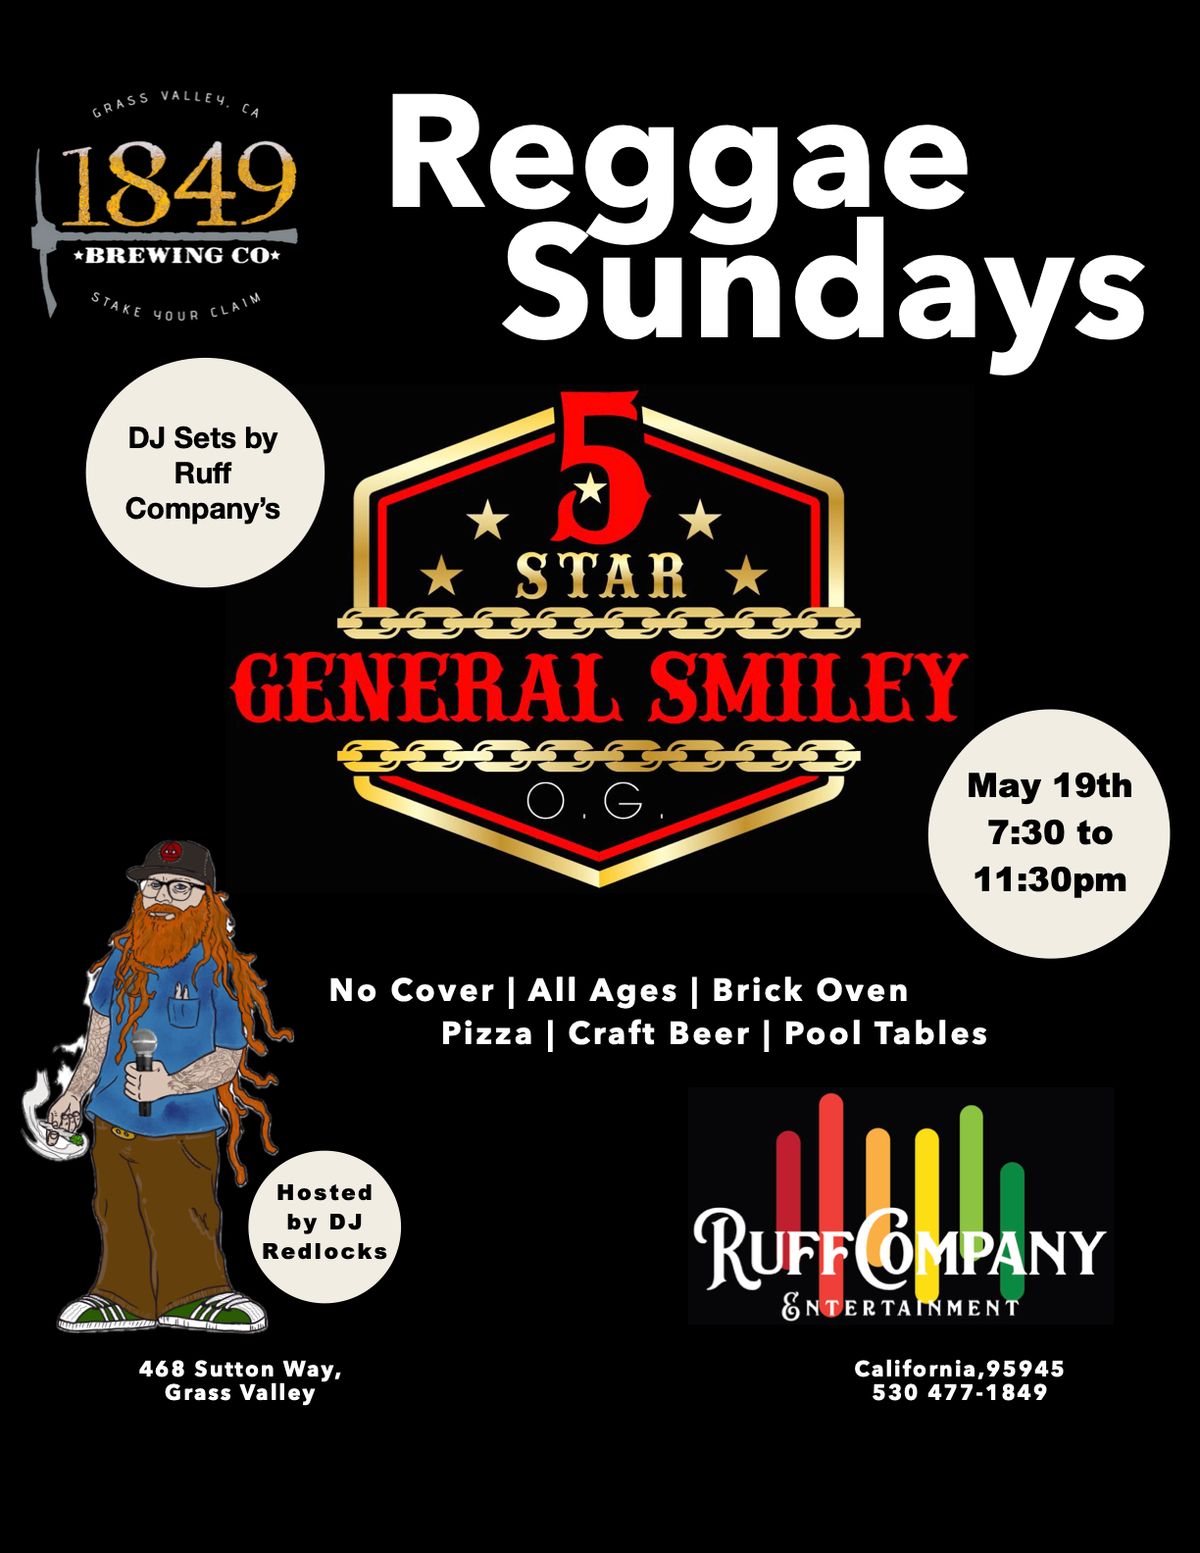 Reggae Sundays with the Original General Smiley One Love Jamdown at 1849 Brewing Co.